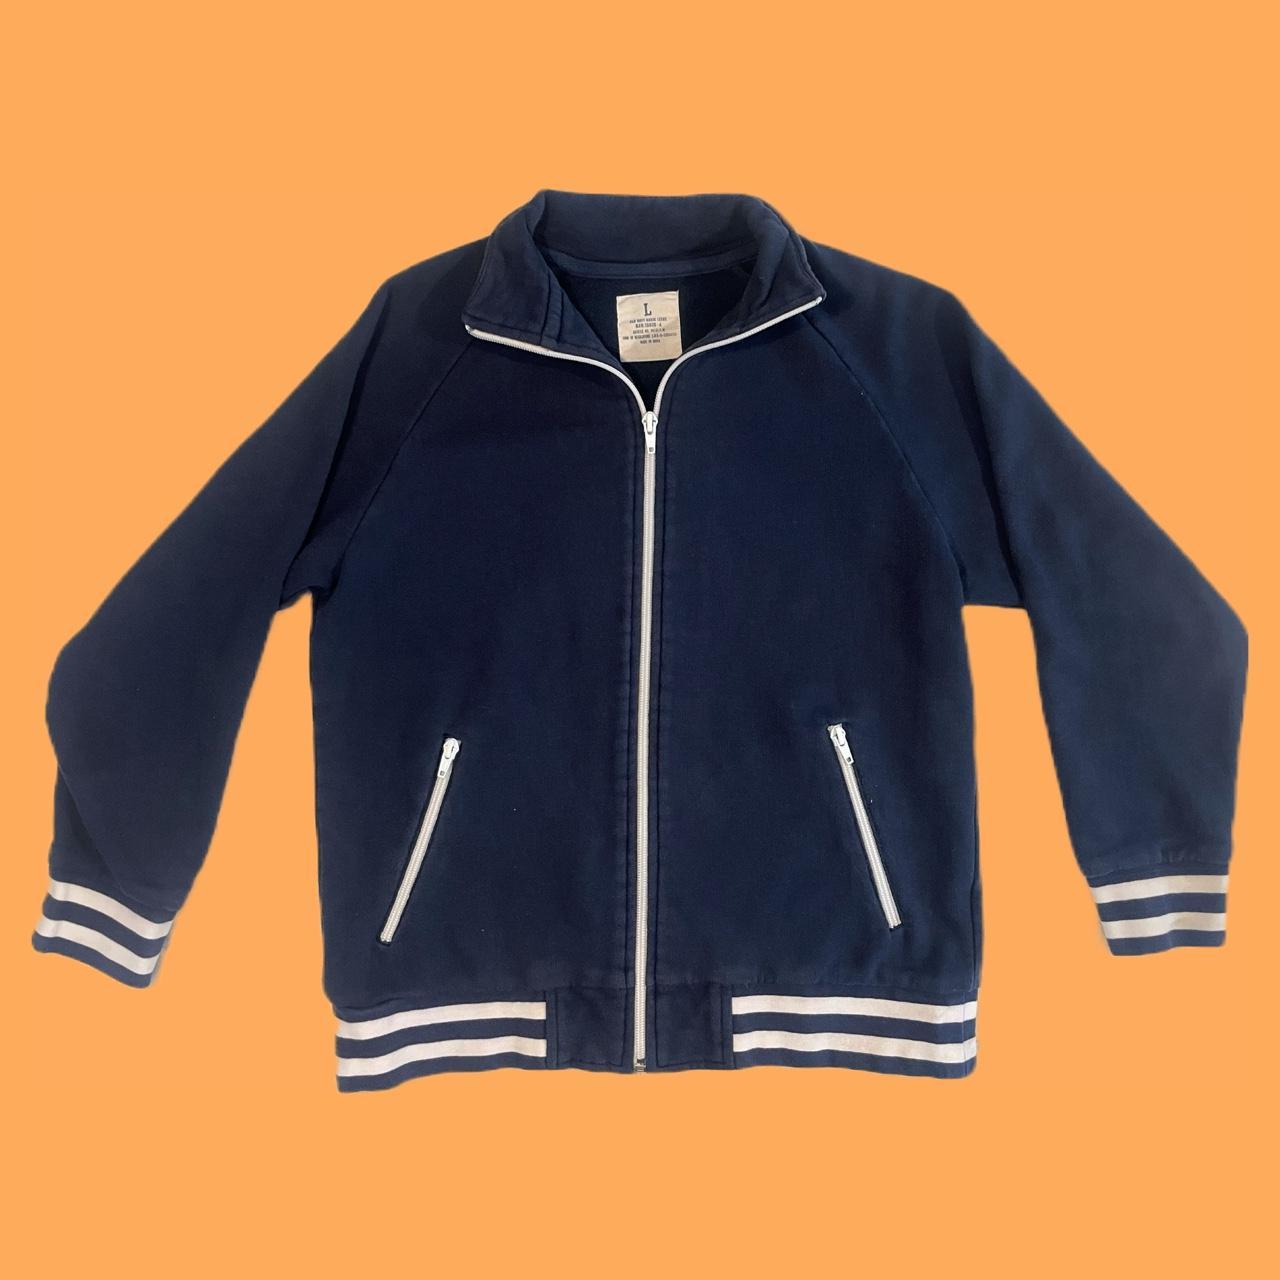 Old Navy Zip Up Hoodie With White Stripe Accents And Depop 